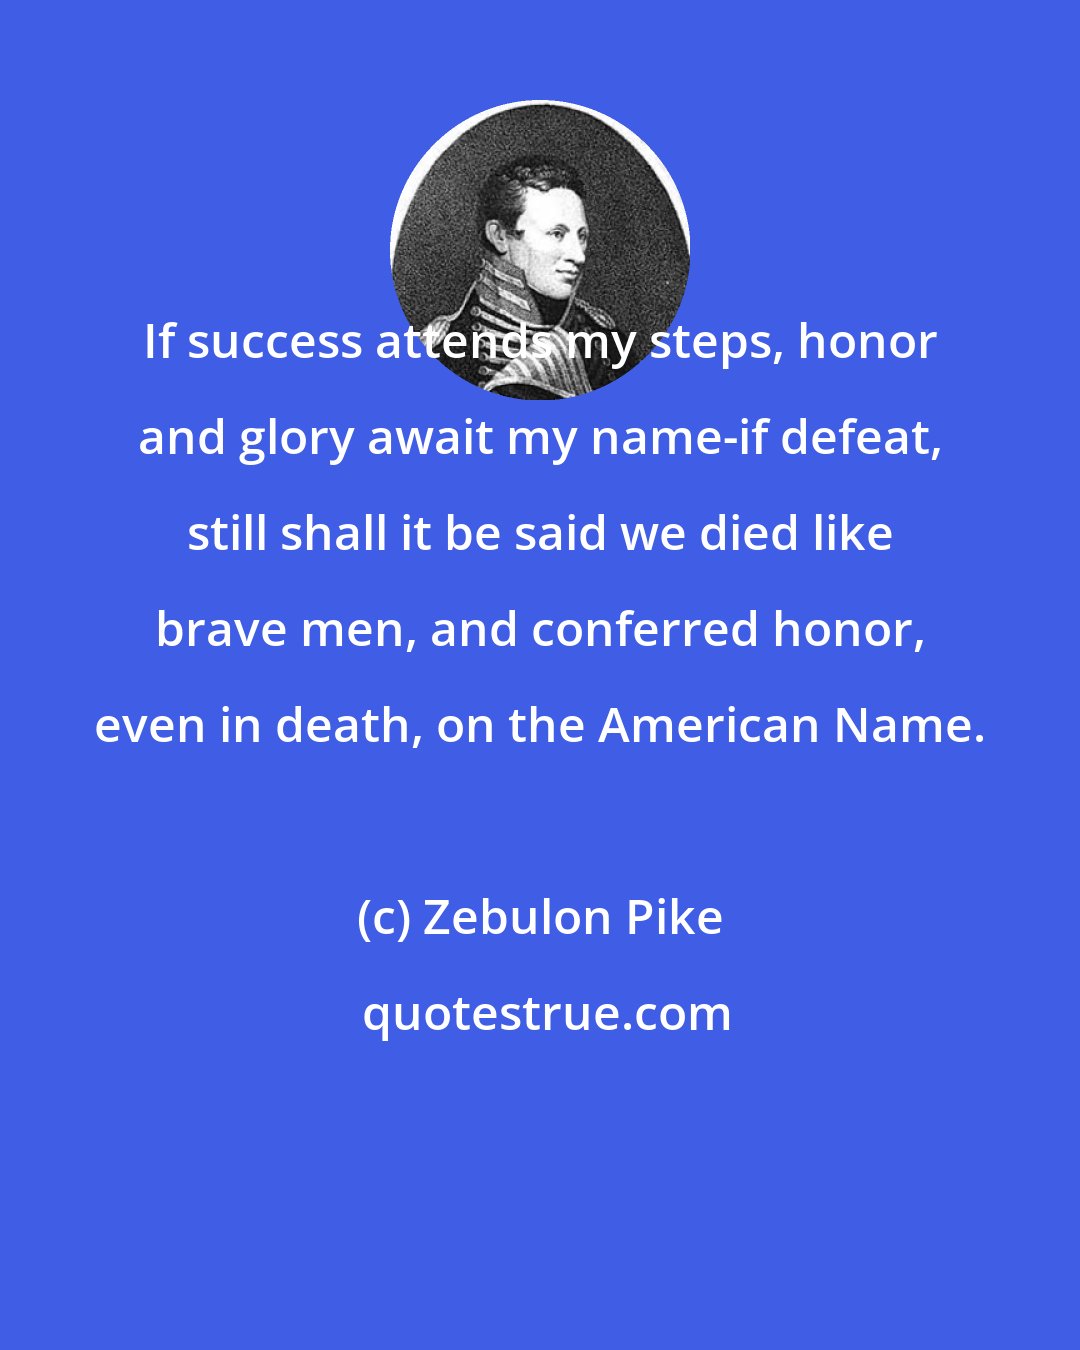 Zebulon Pike: If success attends my steps, honor and glory await my name-if defeat, still shall it be said we died like brave men, and conferred honor, even in death, on the American Name.